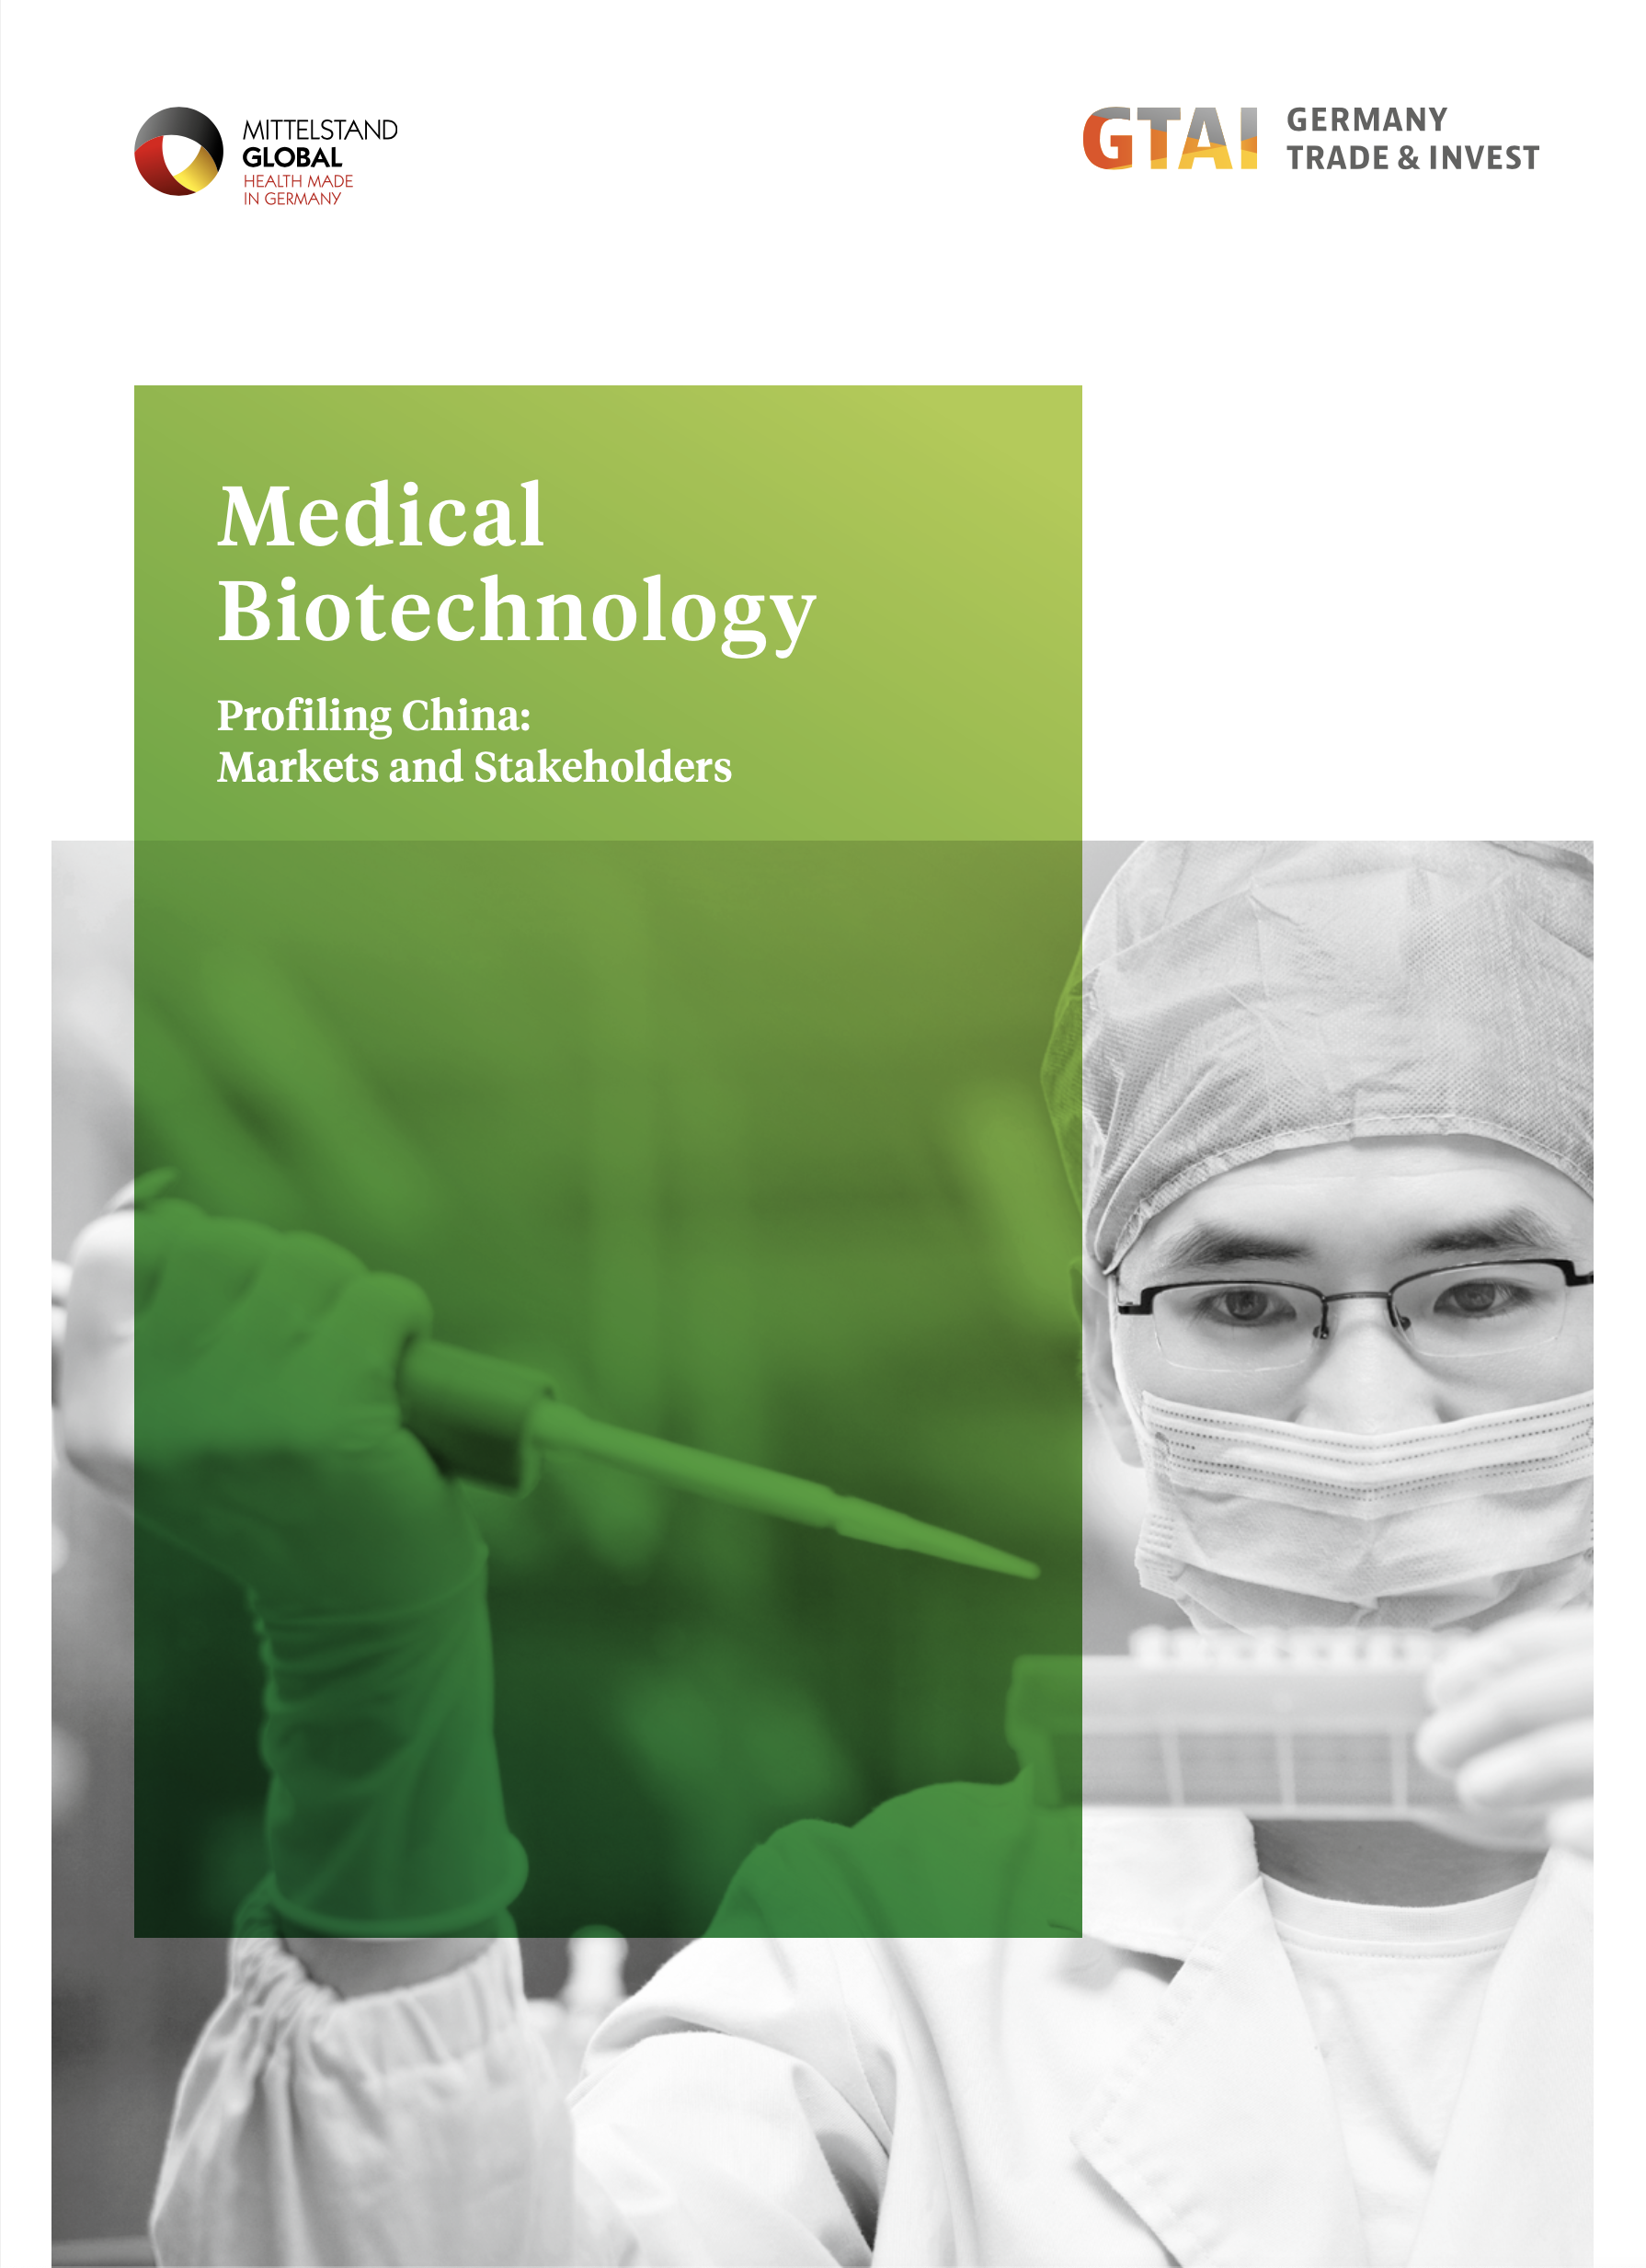 Medical Biotechnology – Profiling China: Markets and Stakeholders